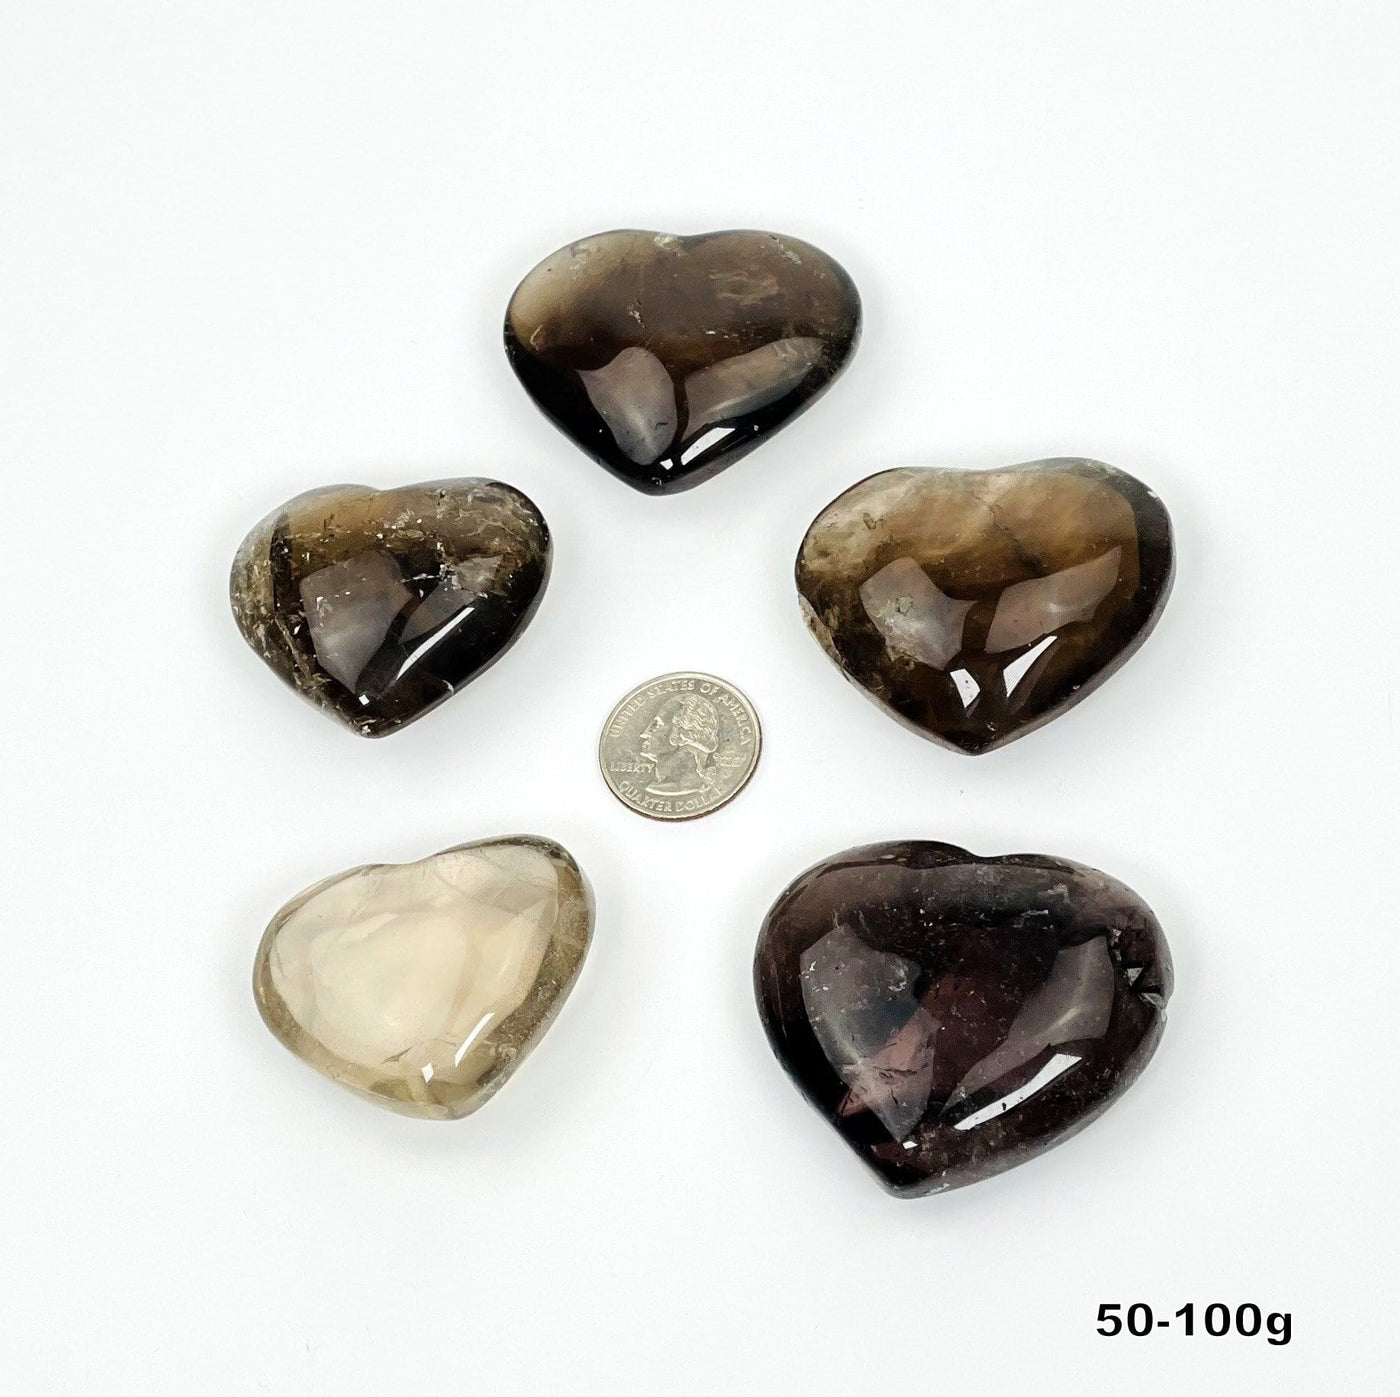 five 50g - 100g smokey quartz polished hearts on white background for possible variations  with quarter for size reference